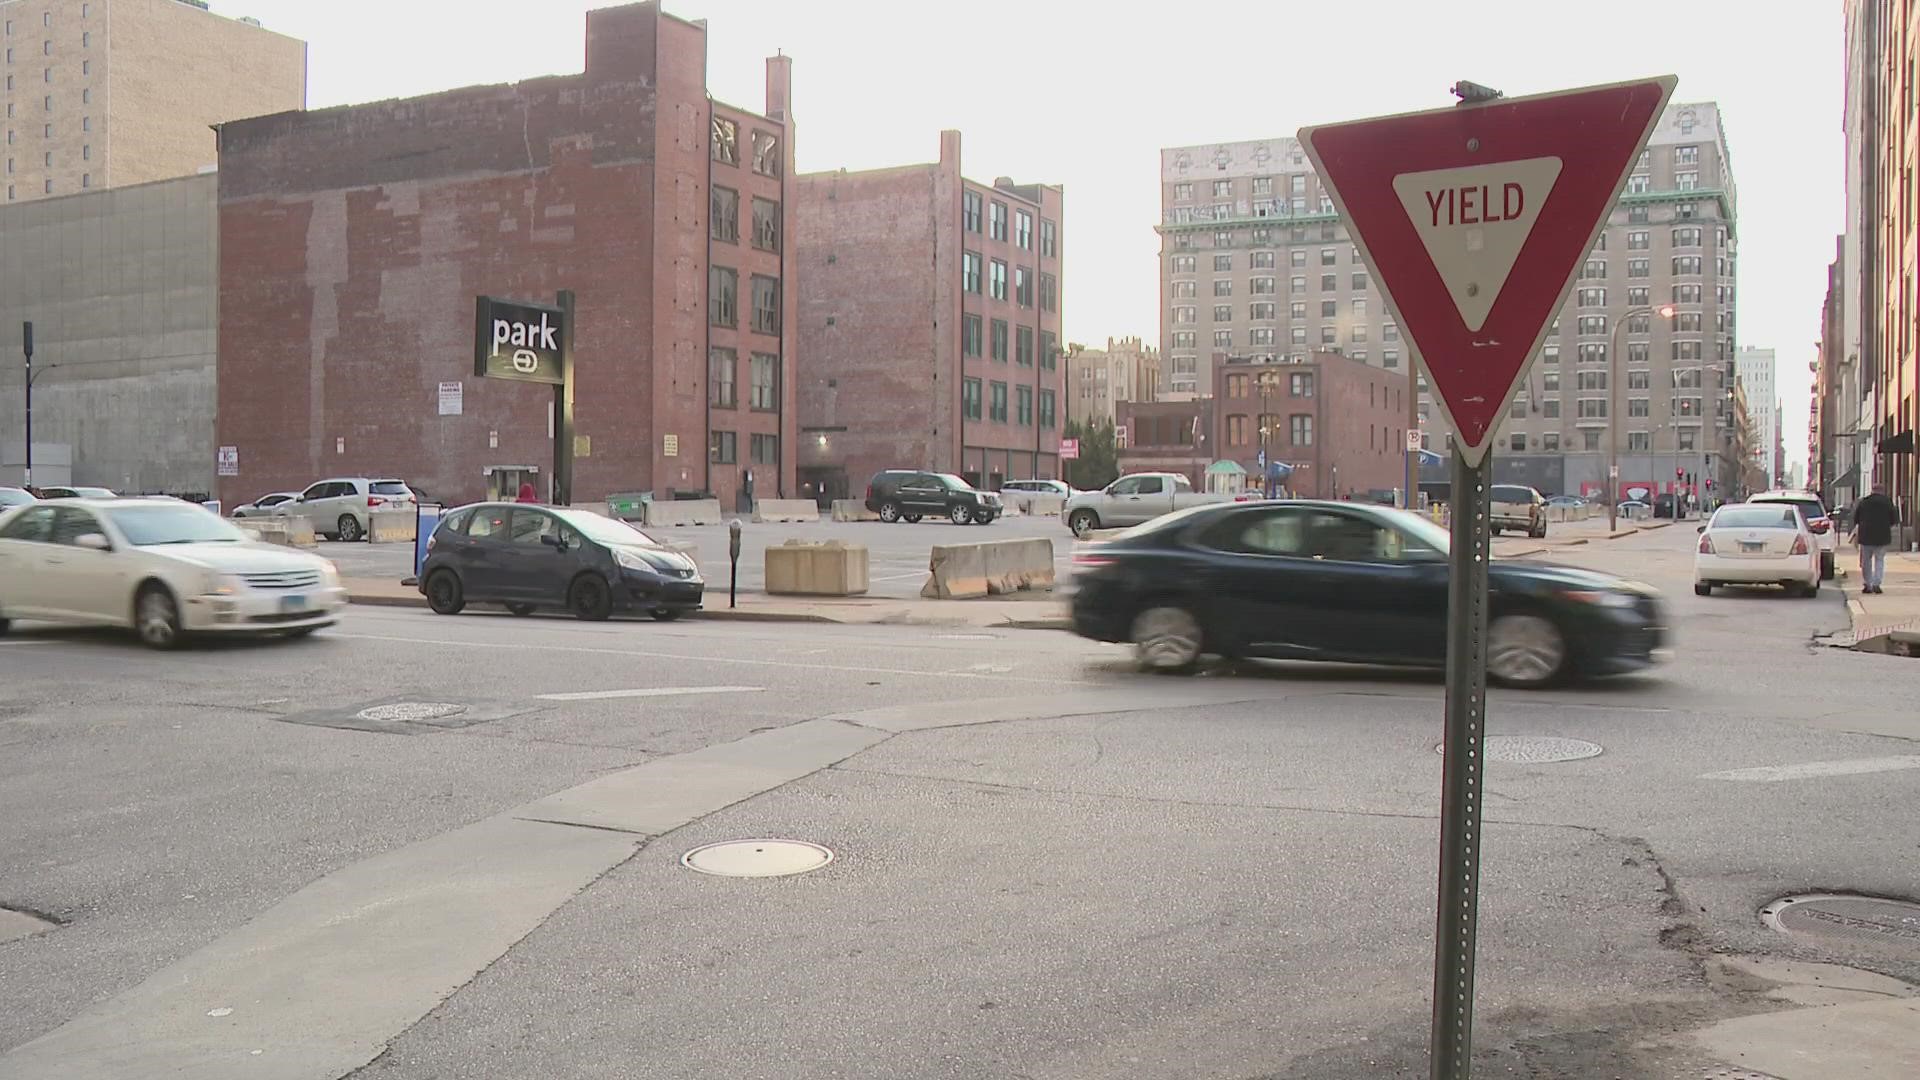 Some people in downtown St. Louis say more stop signs are needed, including on St. Charles Street where a teenager suffered life-changing injuries last week.